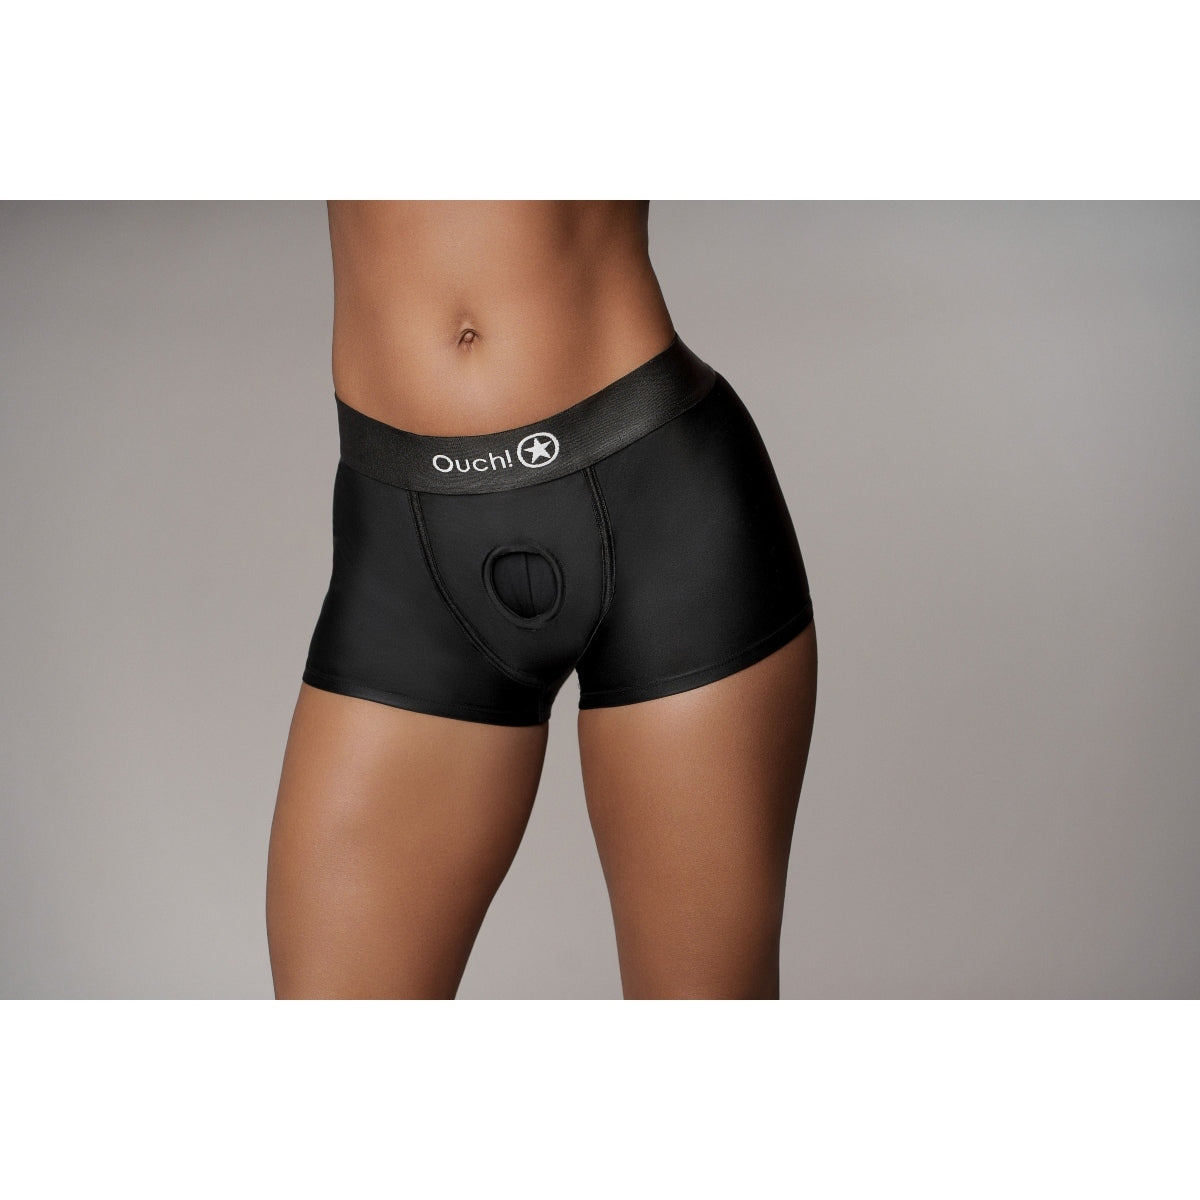 Ouch Vibrating Strap-On Boxer Black